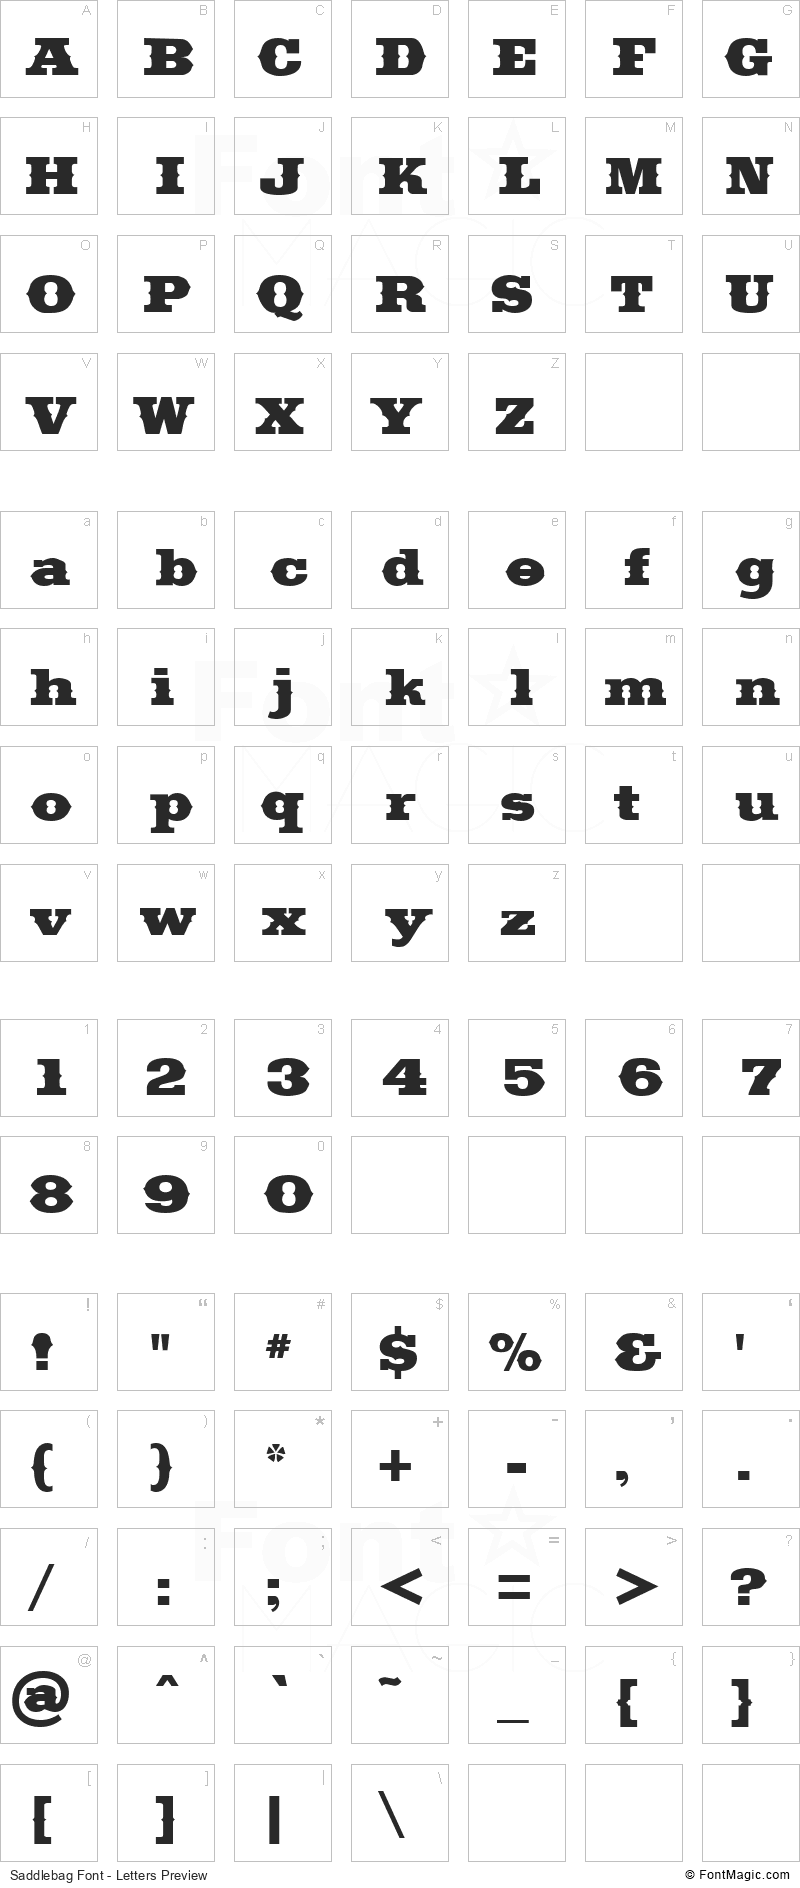 Saddlebag Font - All Latters Preview Chart